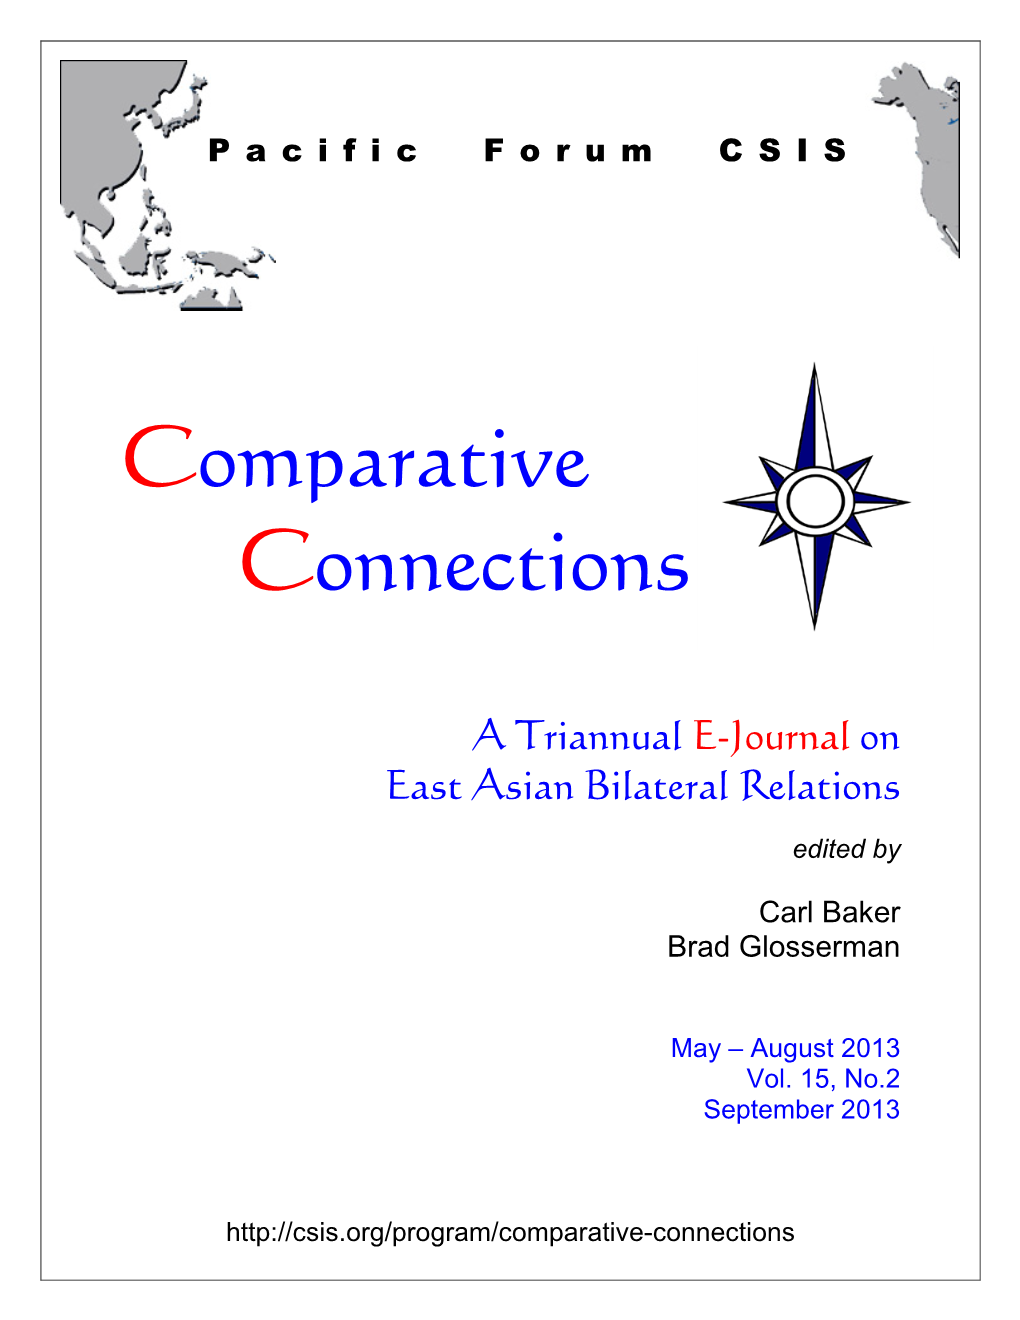 Comparative Connections, Volume 15, Number 2